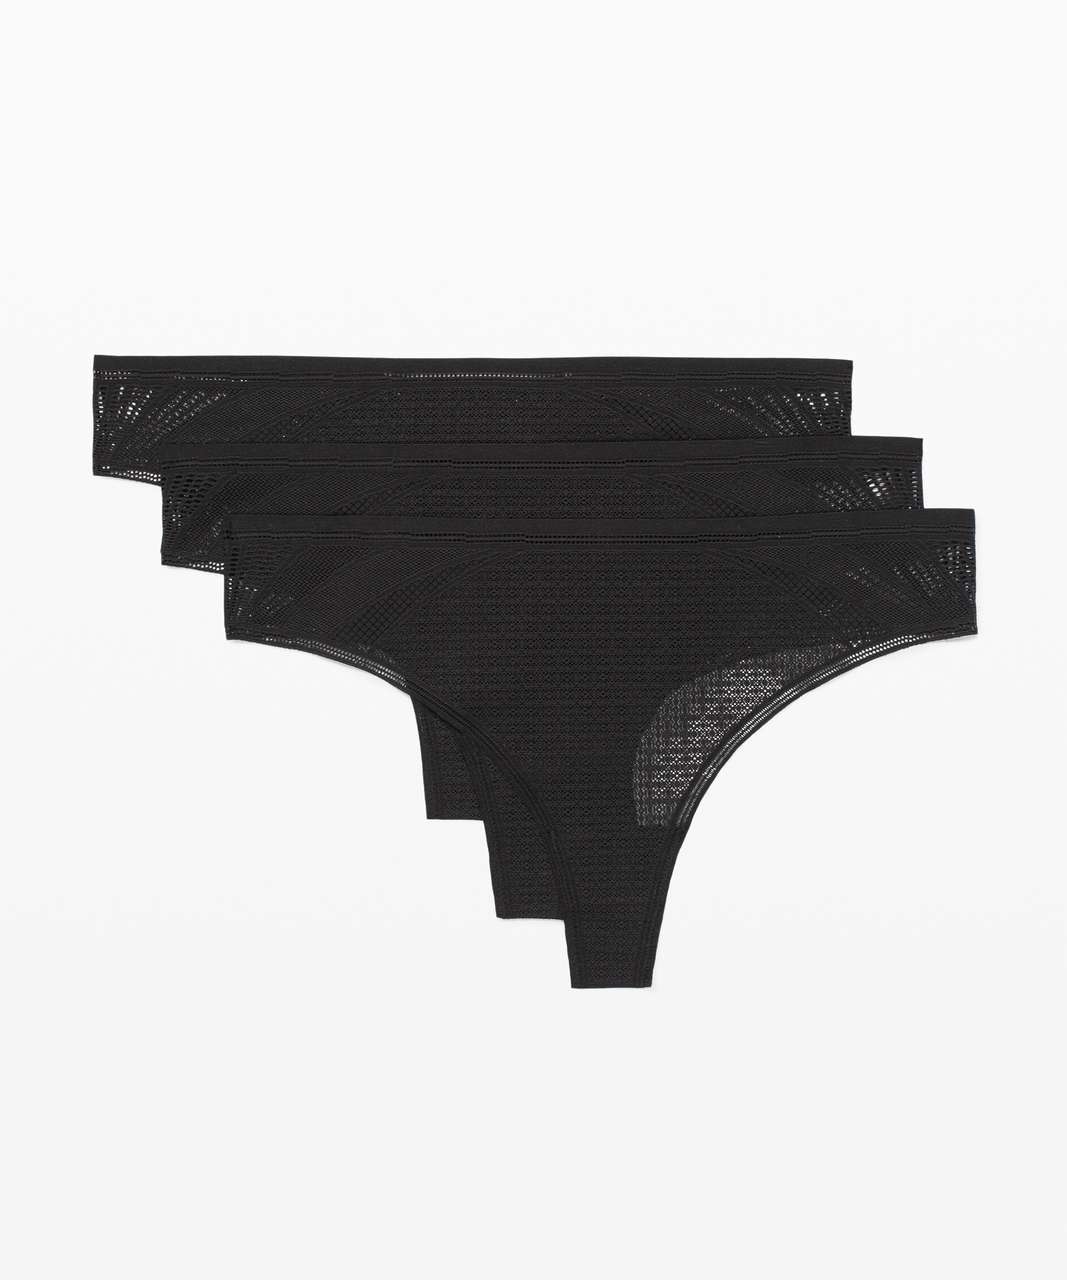 Lululemon InvisiWear Mid-Rise Thong Underwear 3 Pack New in Box BLACK Small